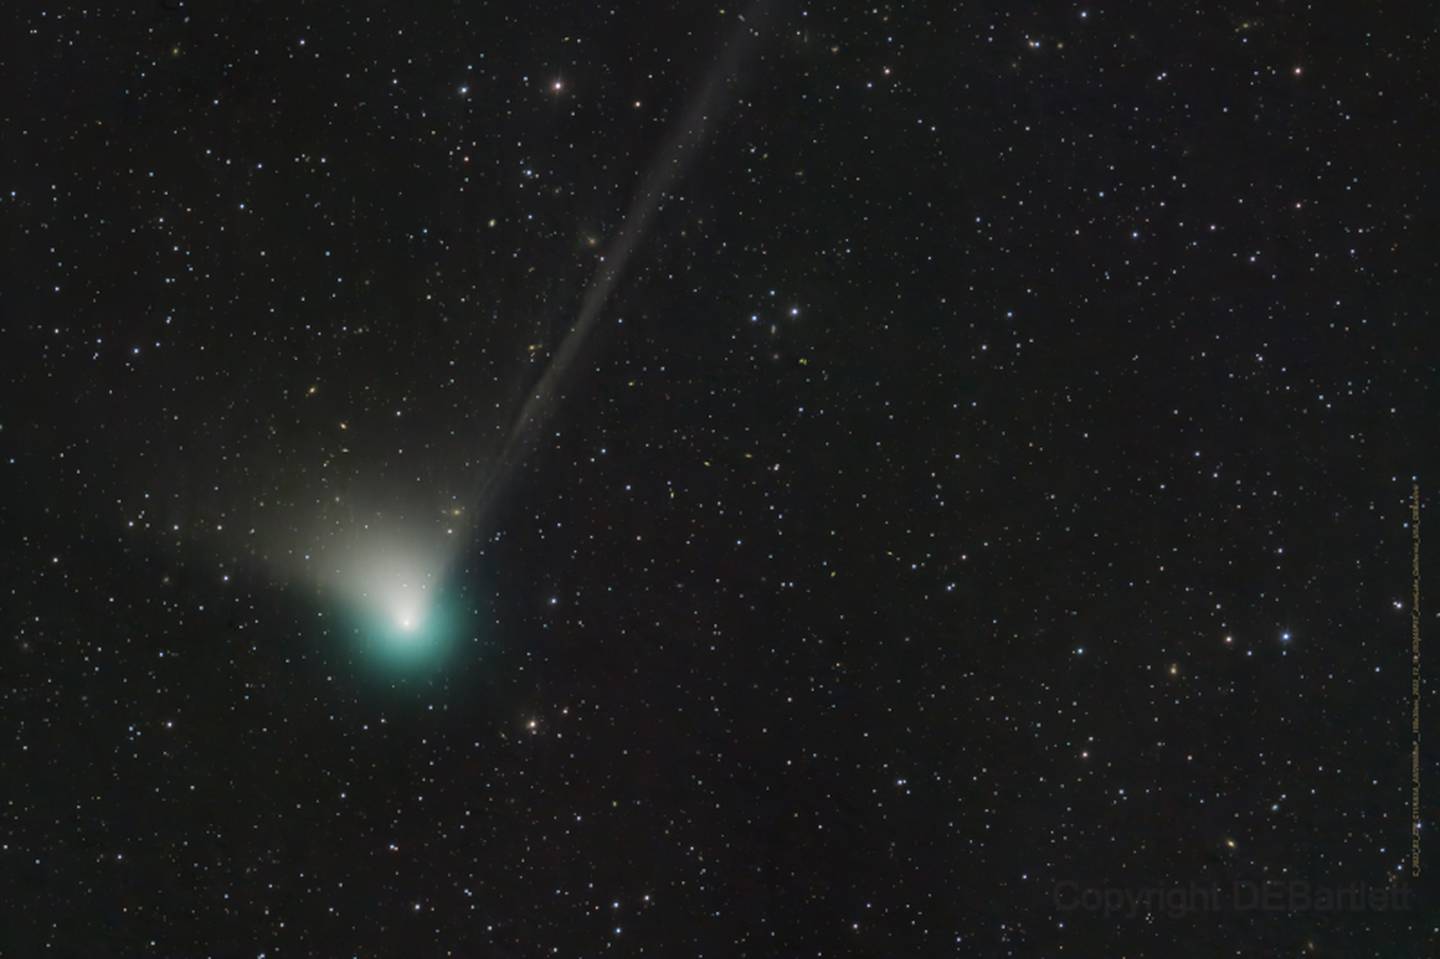 Comet C/2022 E3 (ZTF) was discovered by astronomers using the wide-field survey camera at the Zwicky Transient Facility this year in early March. This fine telescopic image from December 19, 2022, shows the comet's brighter greenish coma, short broad dust tail, and long faint ion tail